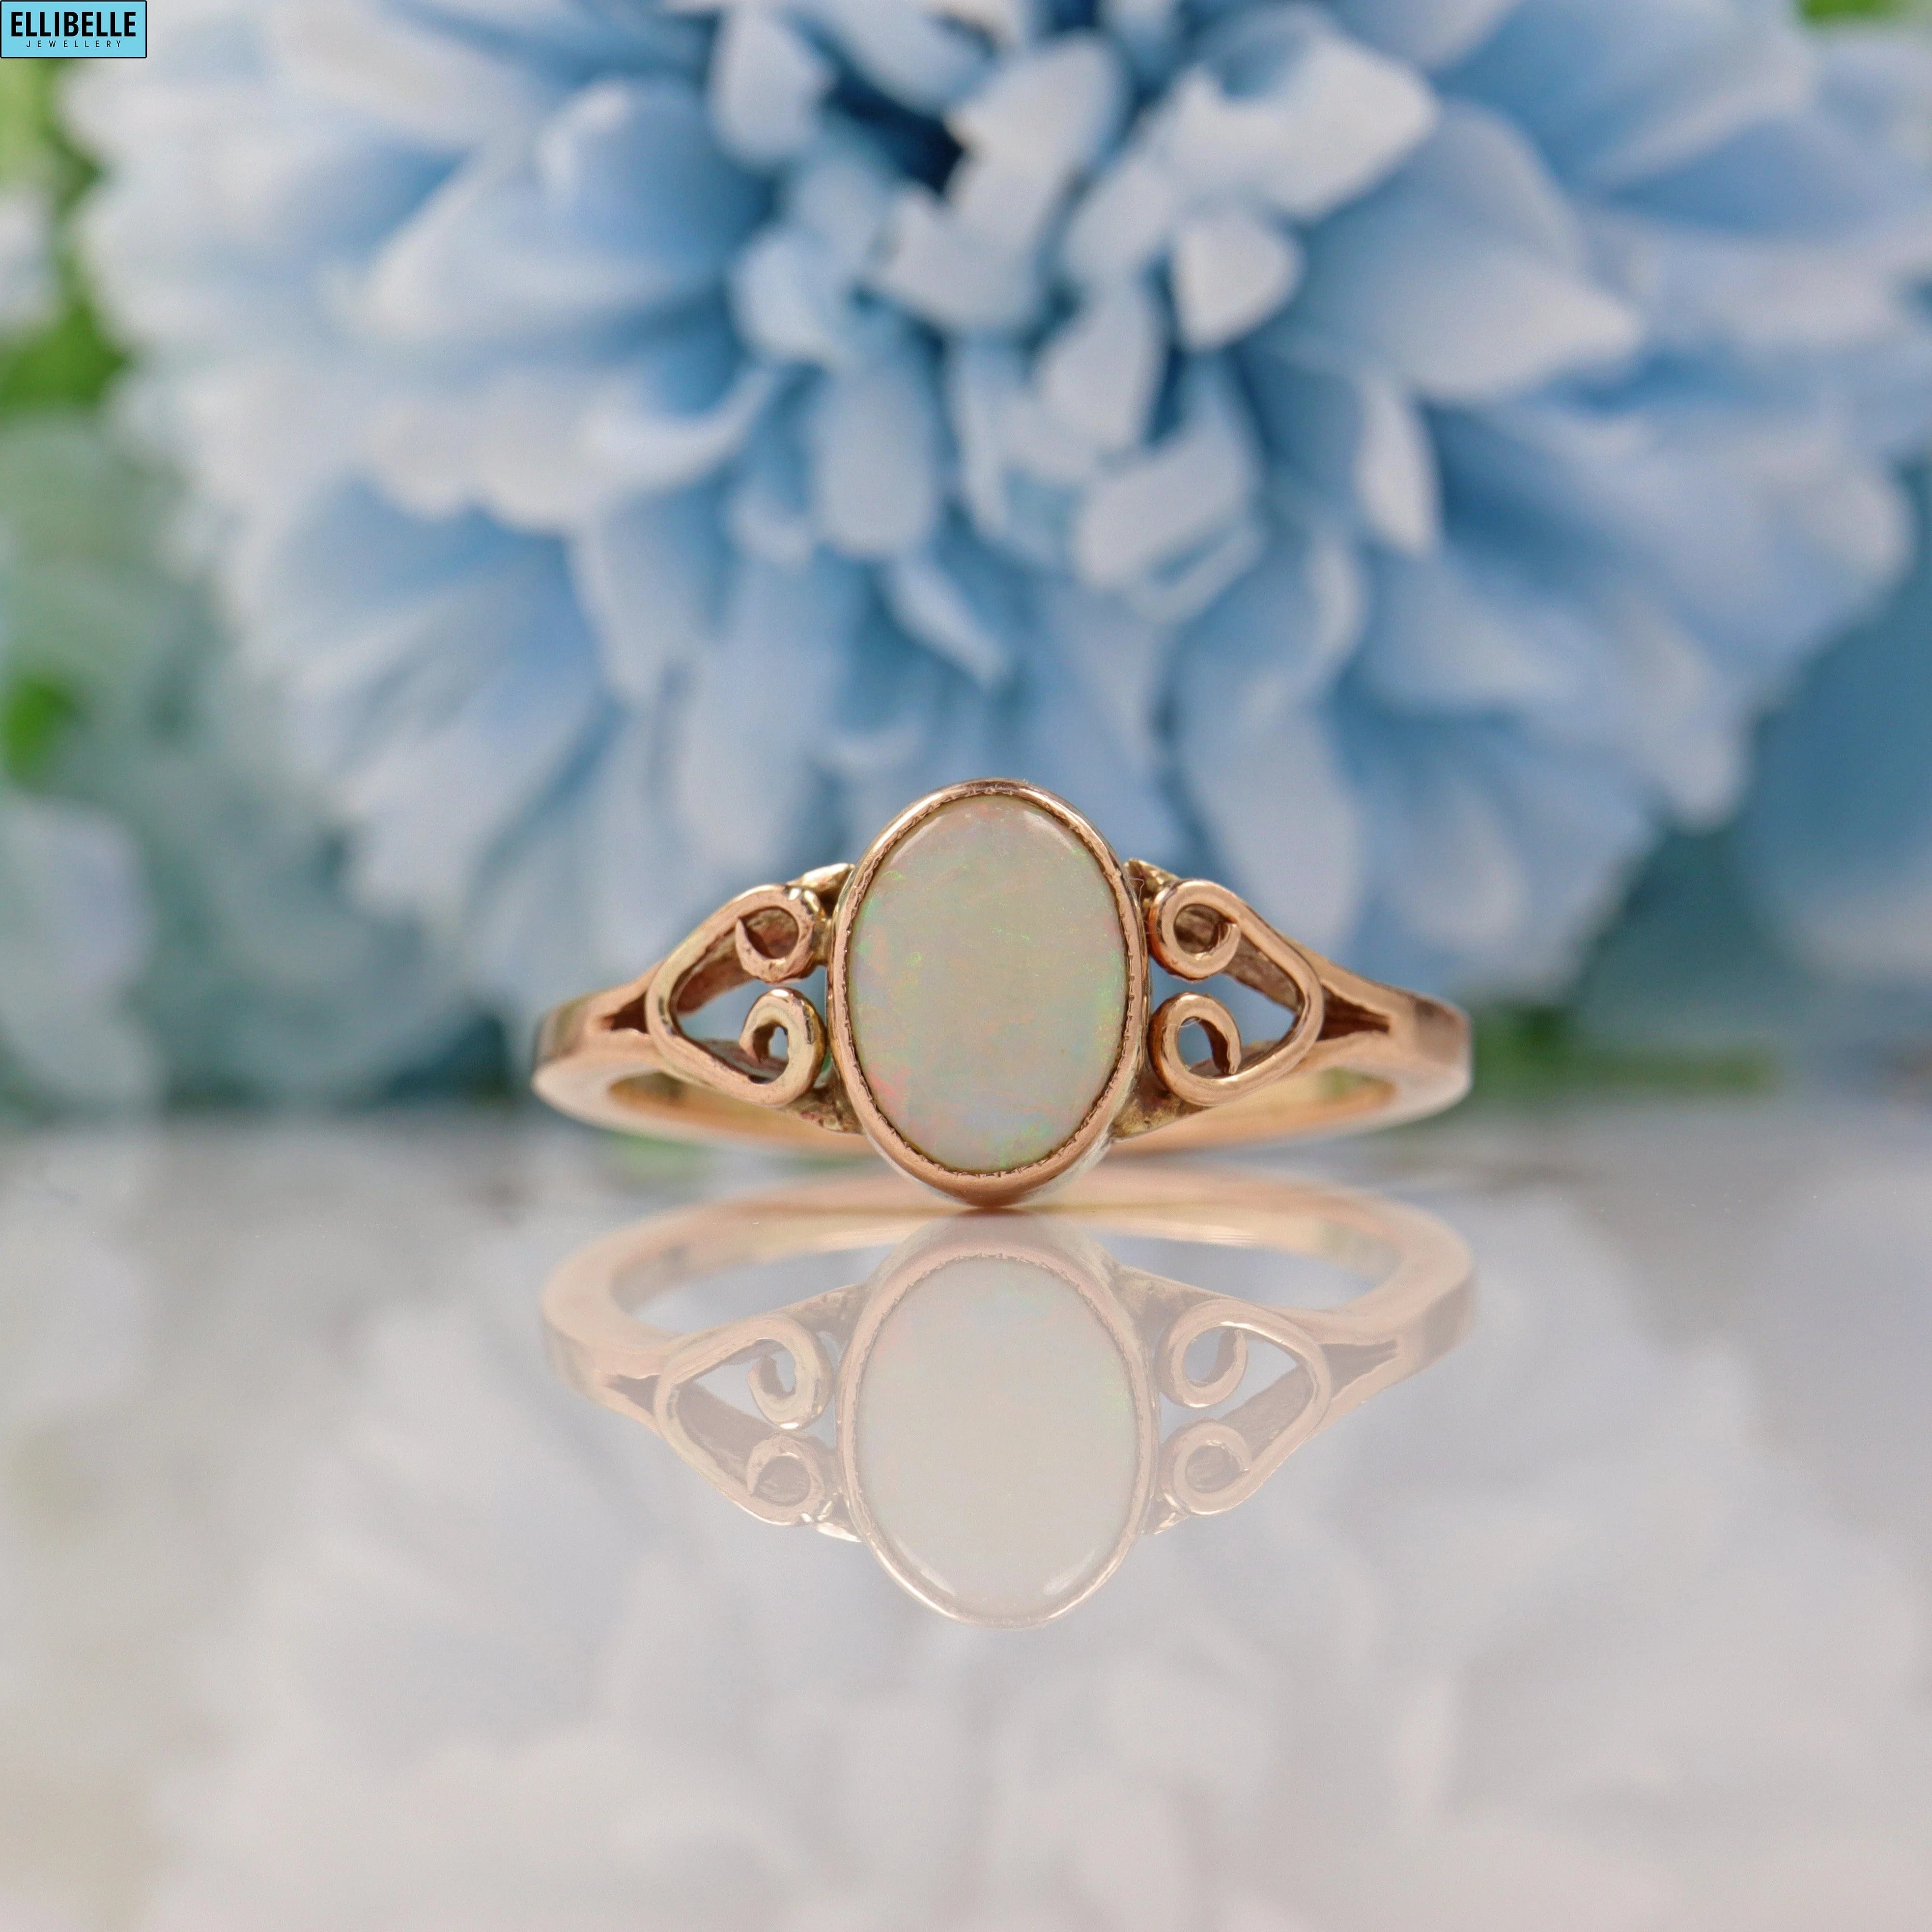 ANTIQUE EDWARDIAN GOLD OPAL SOLITAIRE RING